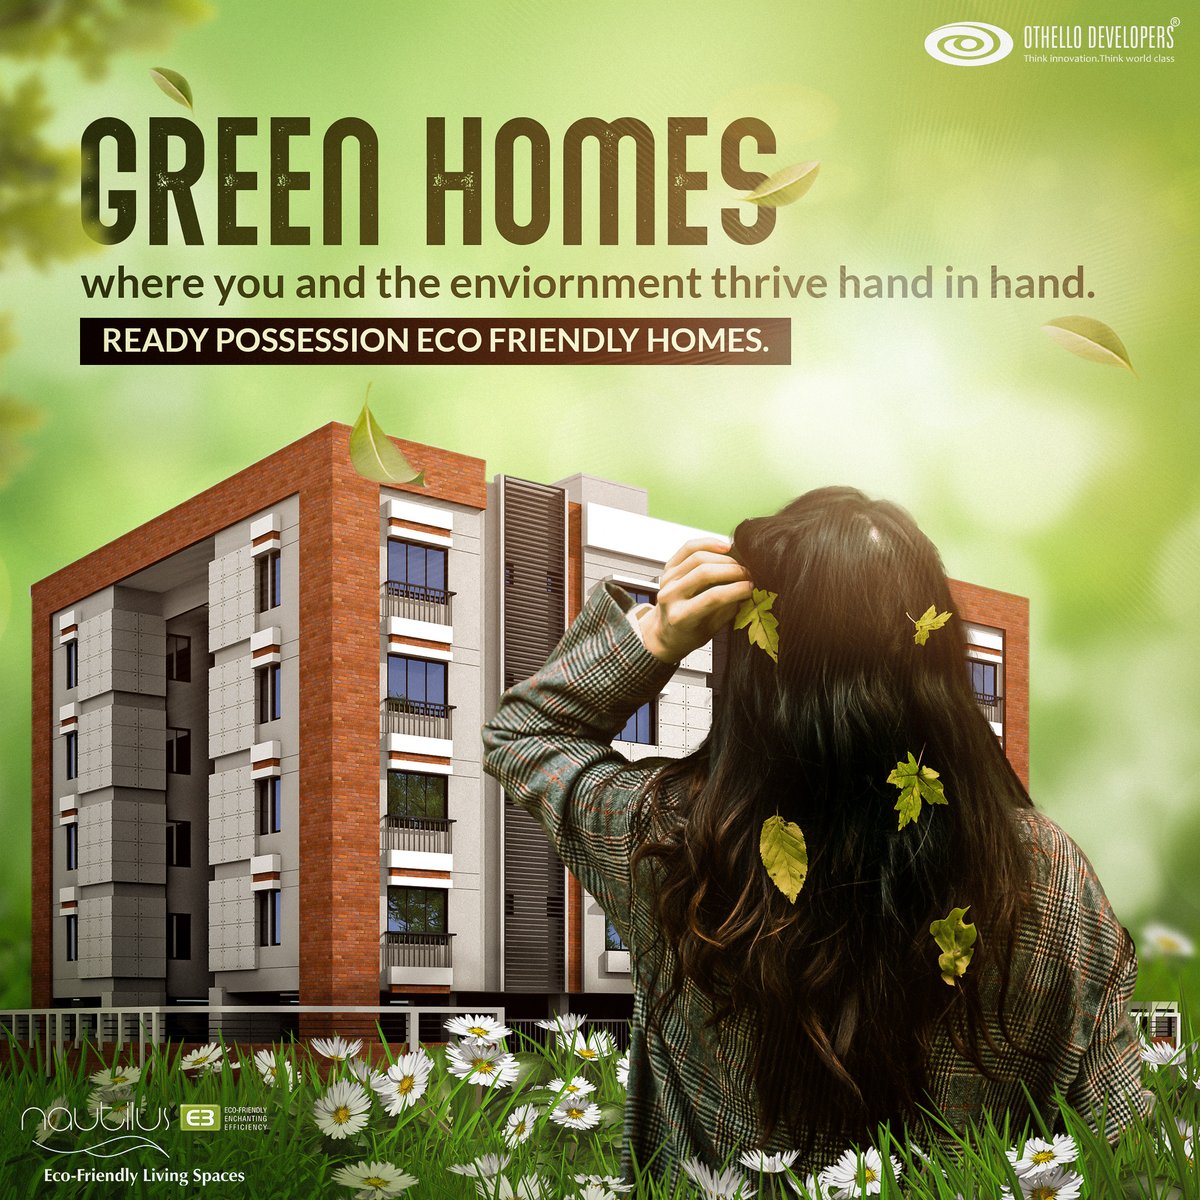 Take a step towards a sustainable future with our 3 BHK Eco-Friendly residential apartments!

Be a part of Vadodara's first IGBC-approved eco-friendly building today!

#Sustainability #GreenHomes #EcoFriendlyLiving #ForSale #LuxuryHomes #ReadyPossession #RealEstate